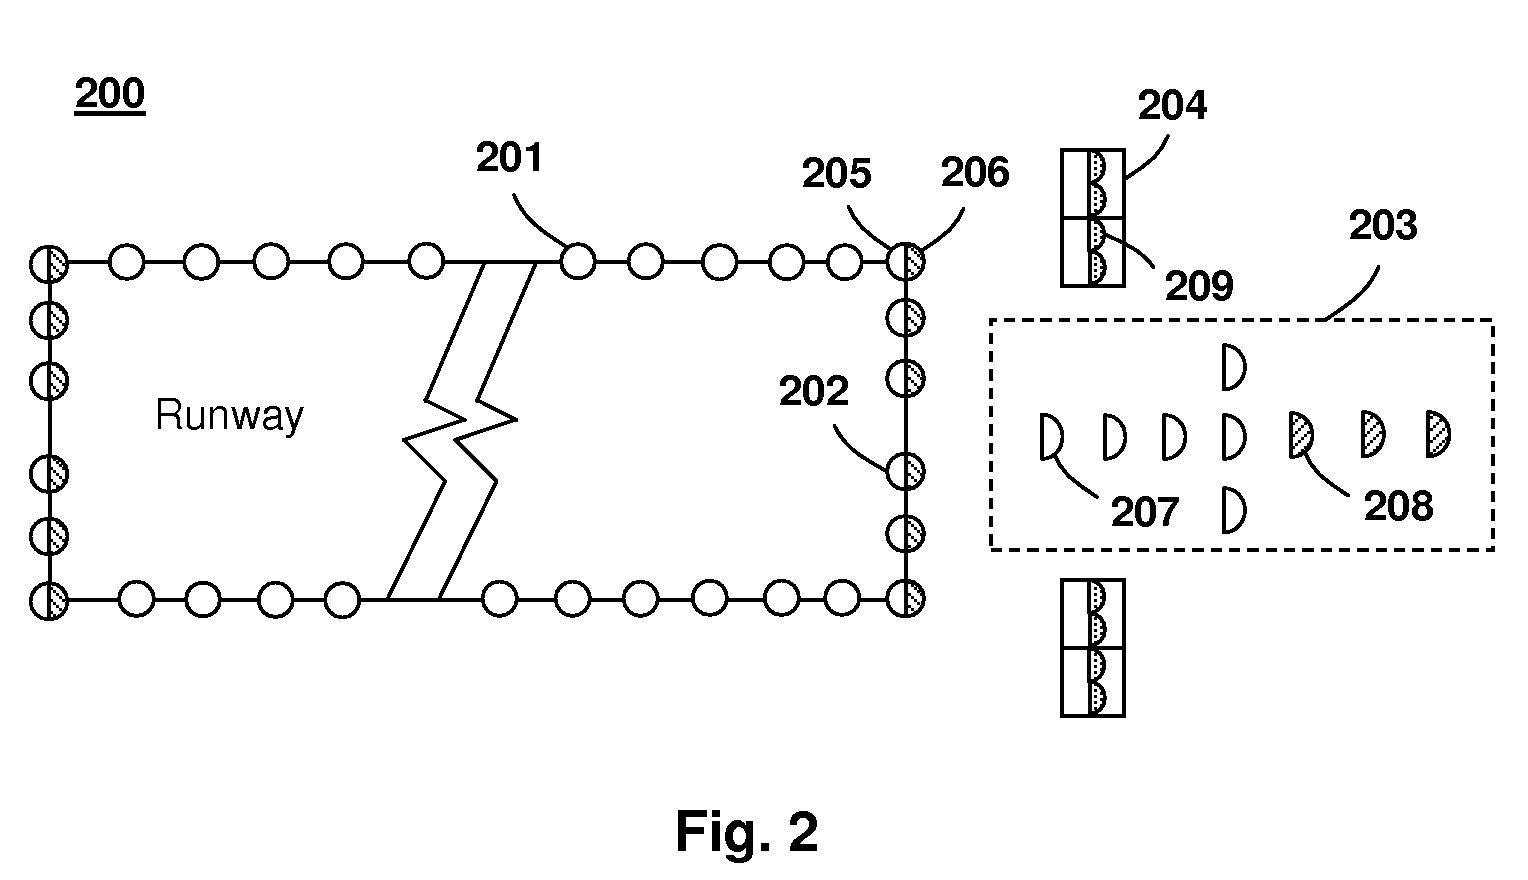 LED signaling apparatus with infrared emission